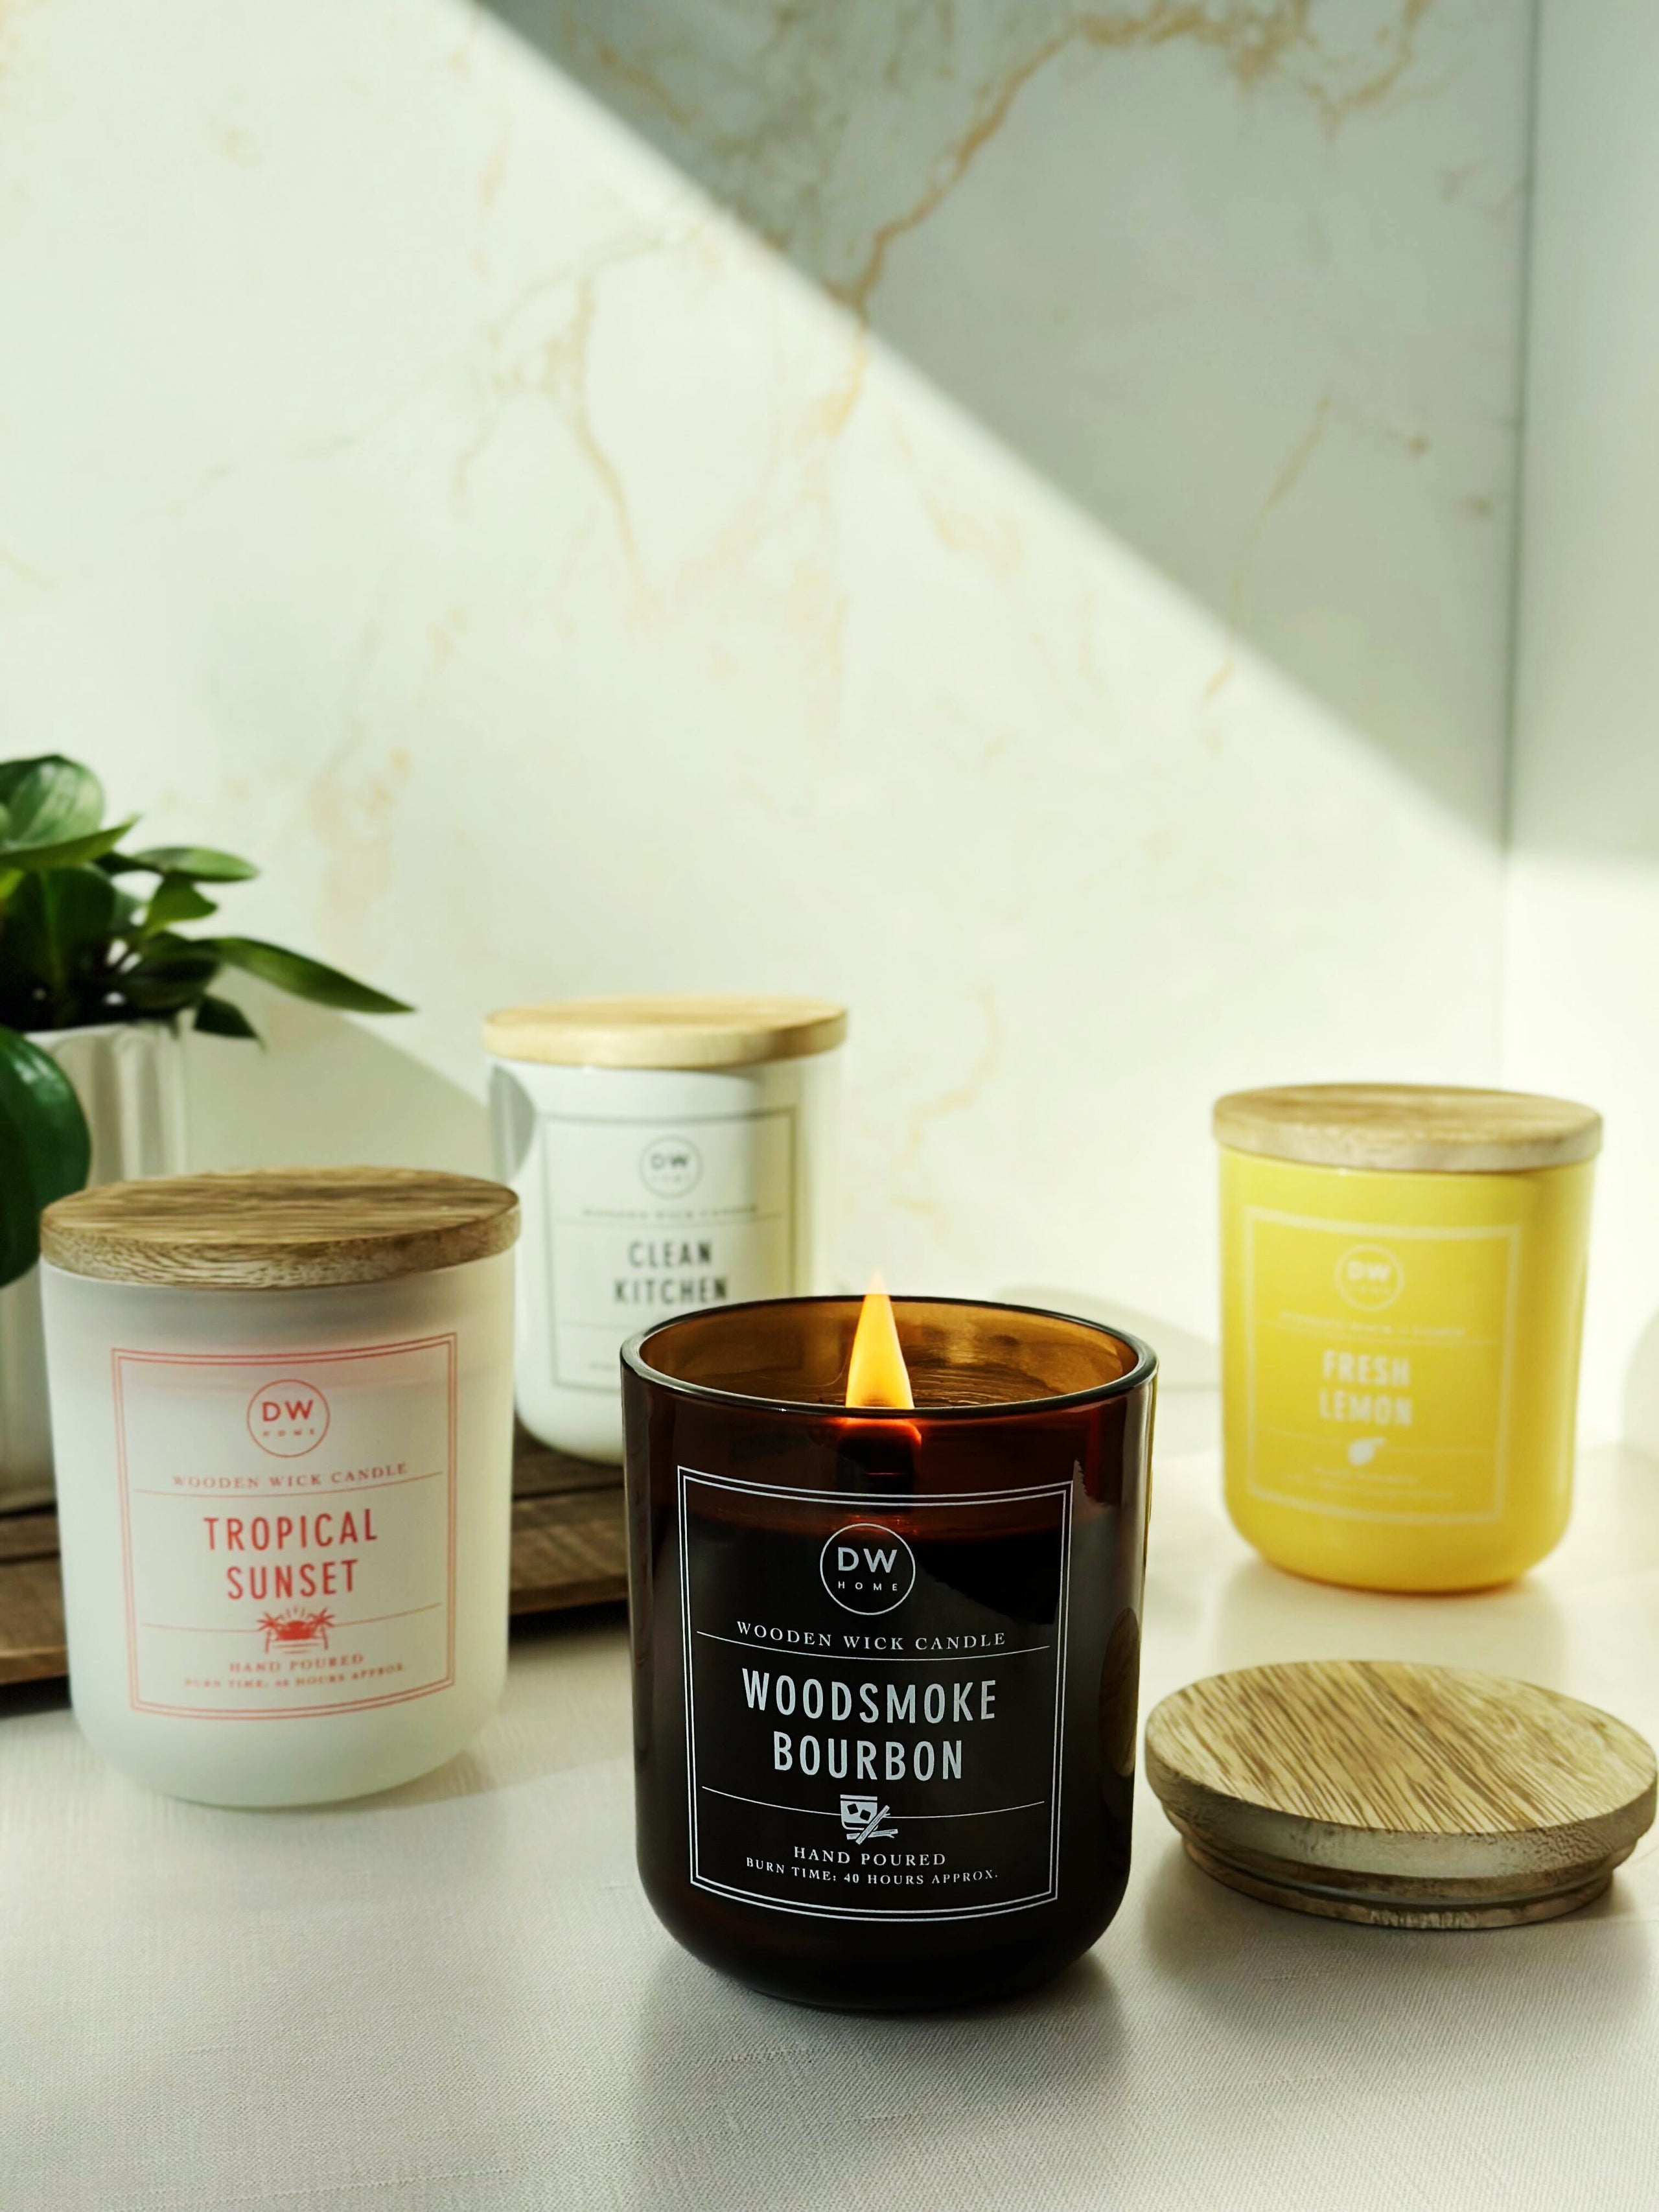 Wooden wick candles